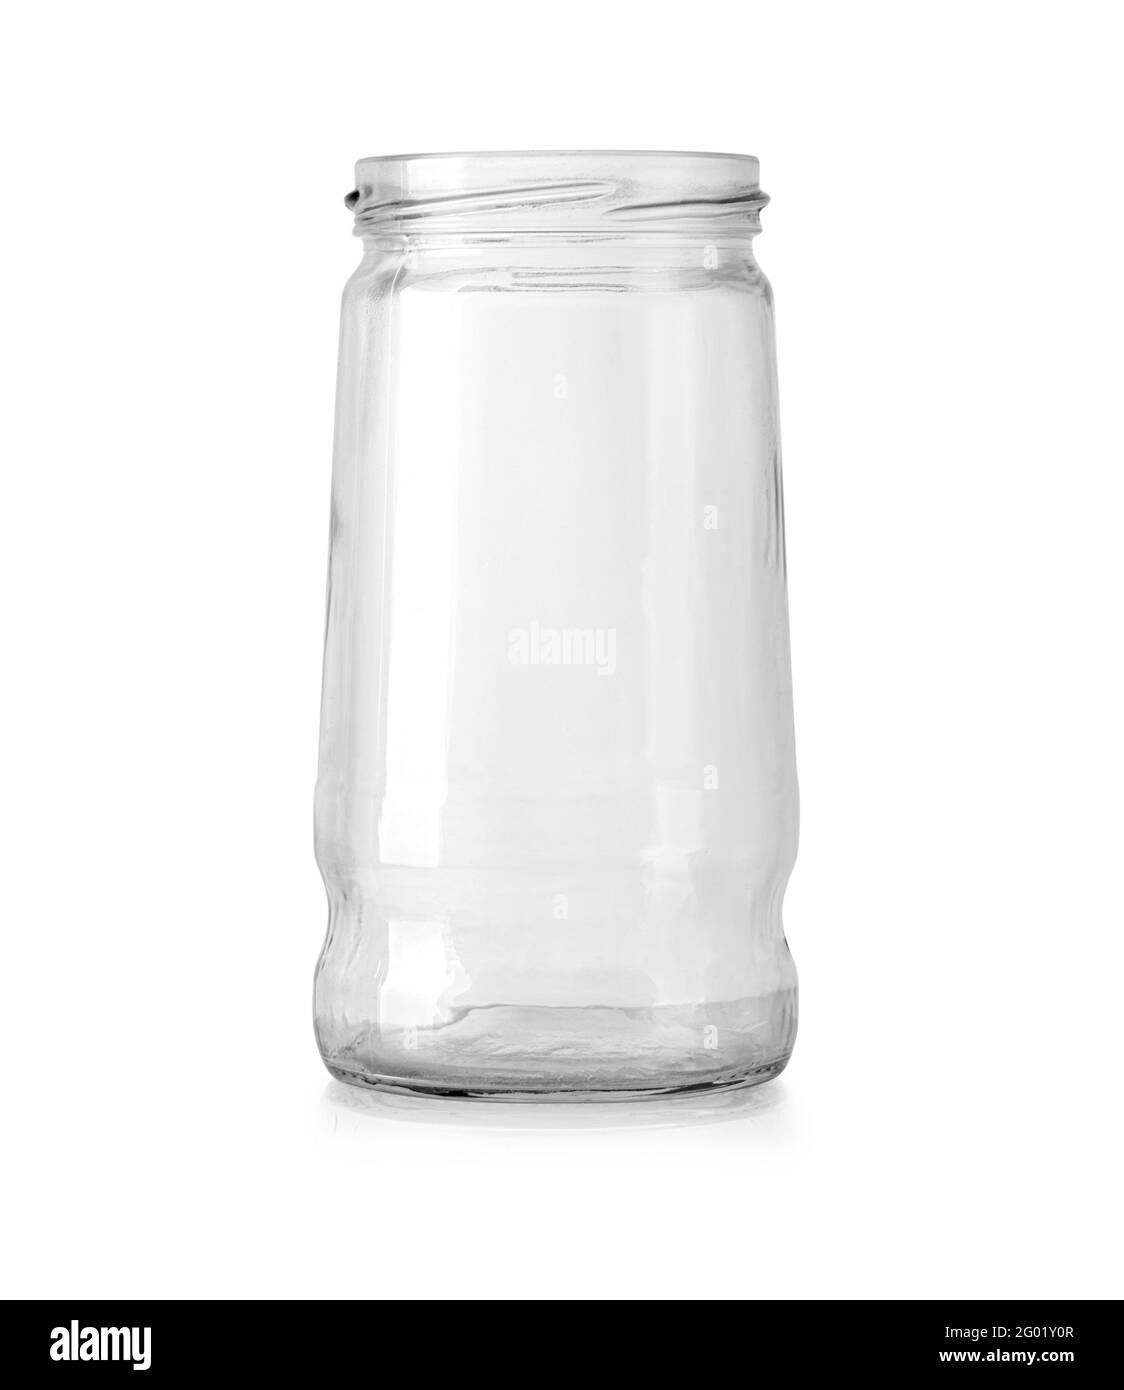 Jar glass isolated on white background with clipping path Stock Photo